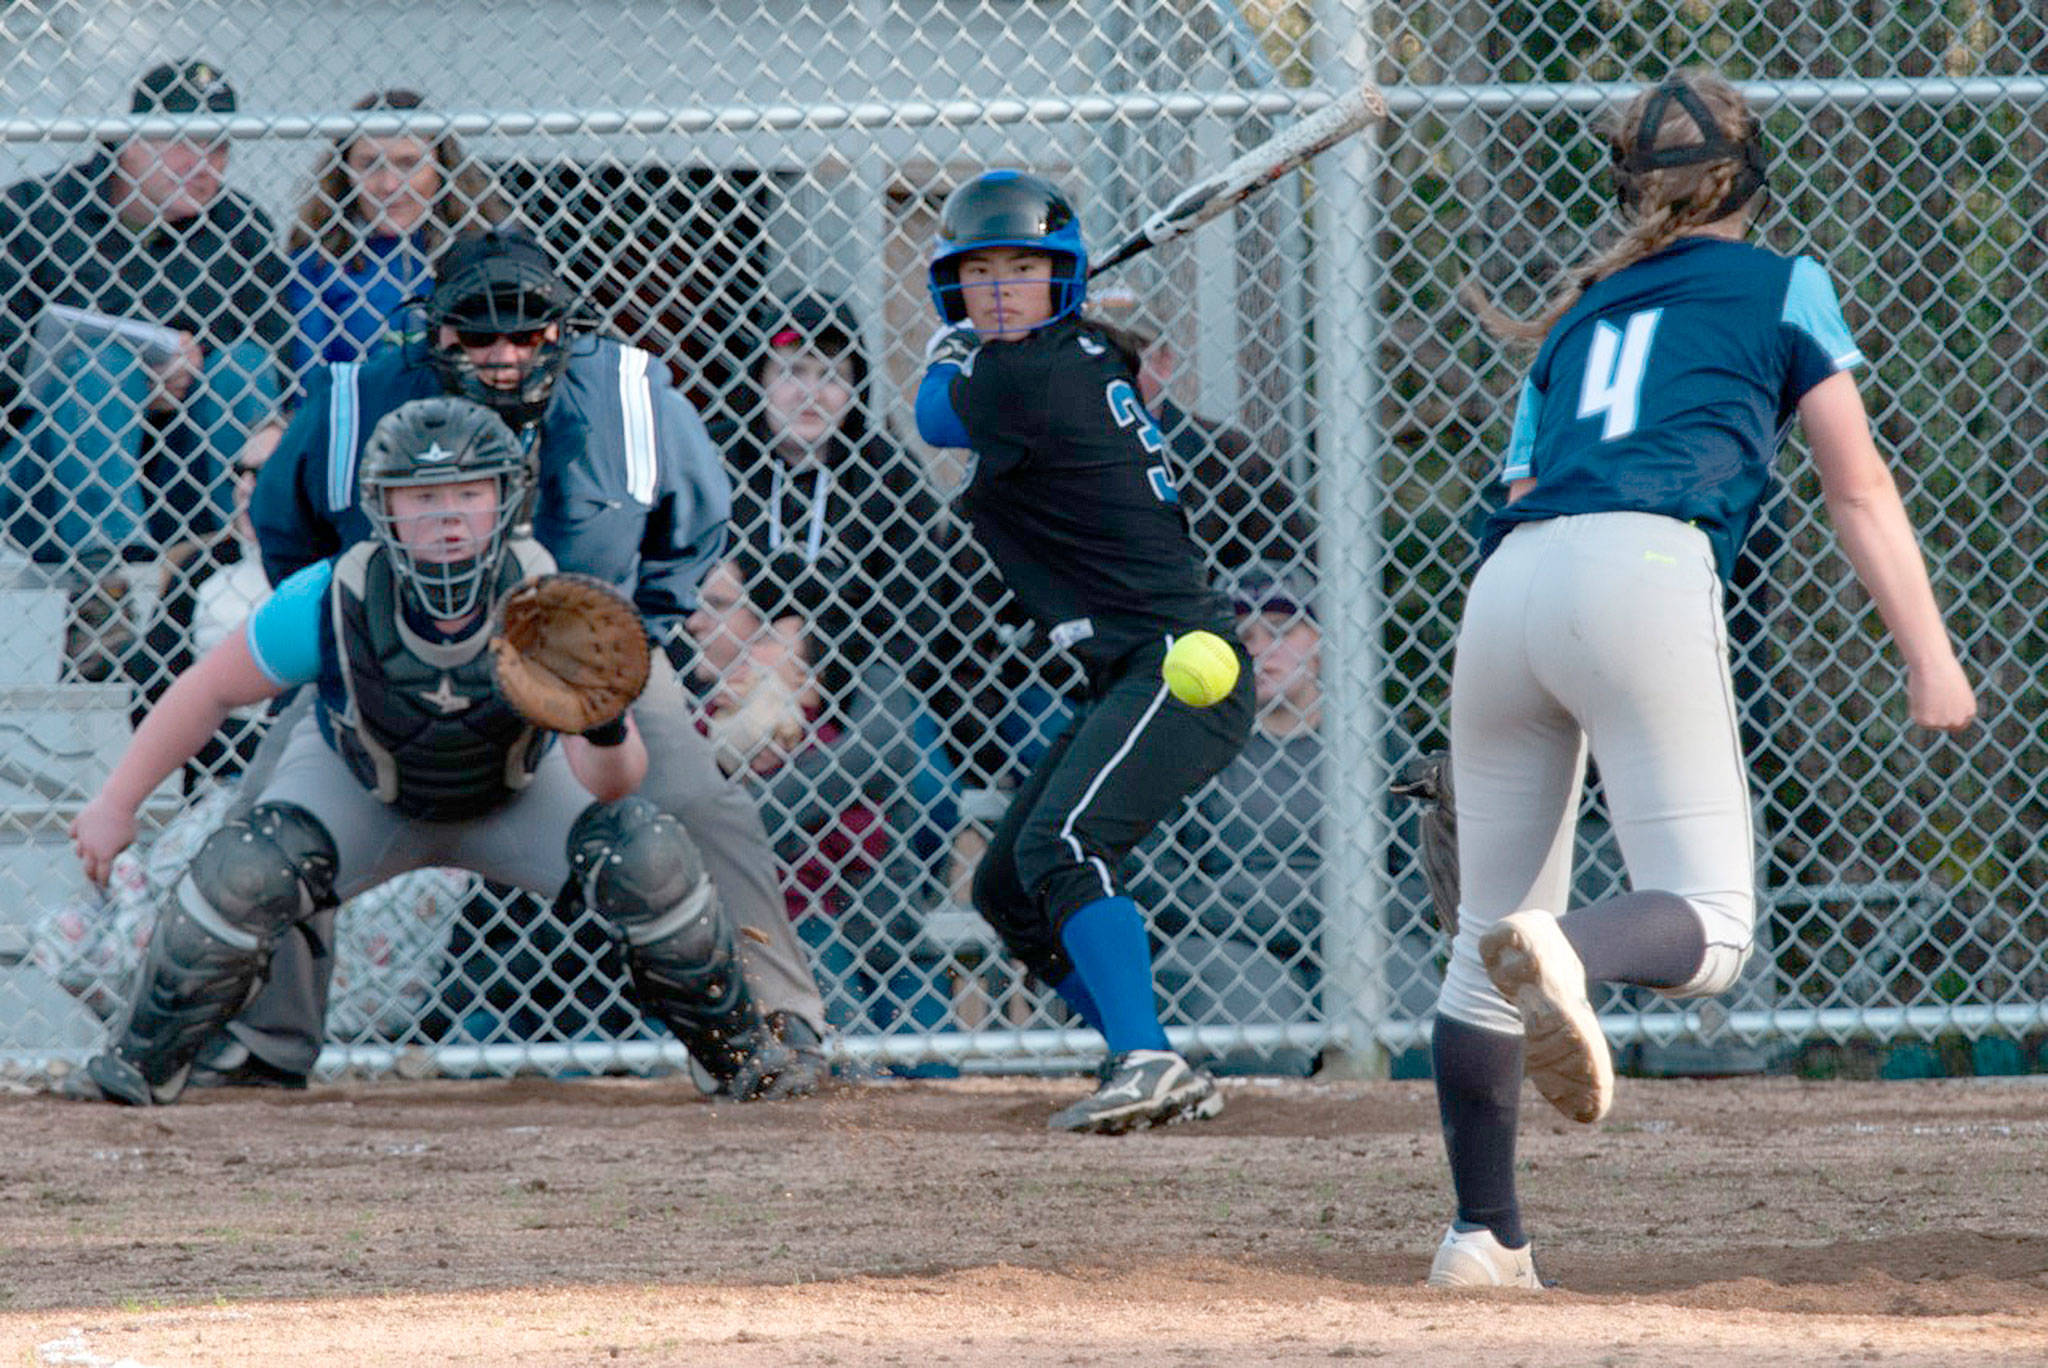 South Whidbey’s Ari Marshall waits for the pitch in a game against Sultan last season. (Photo by Paul Lien)